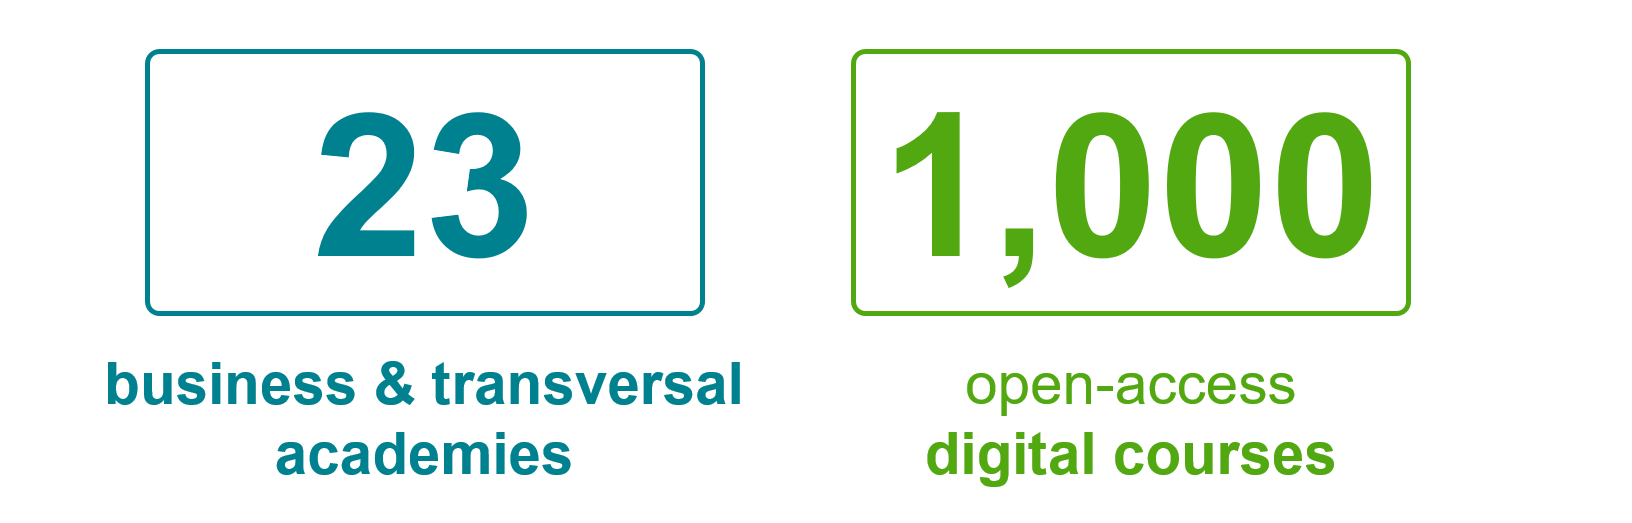 23 business and transversal academies, 1,000 open-access digital courses